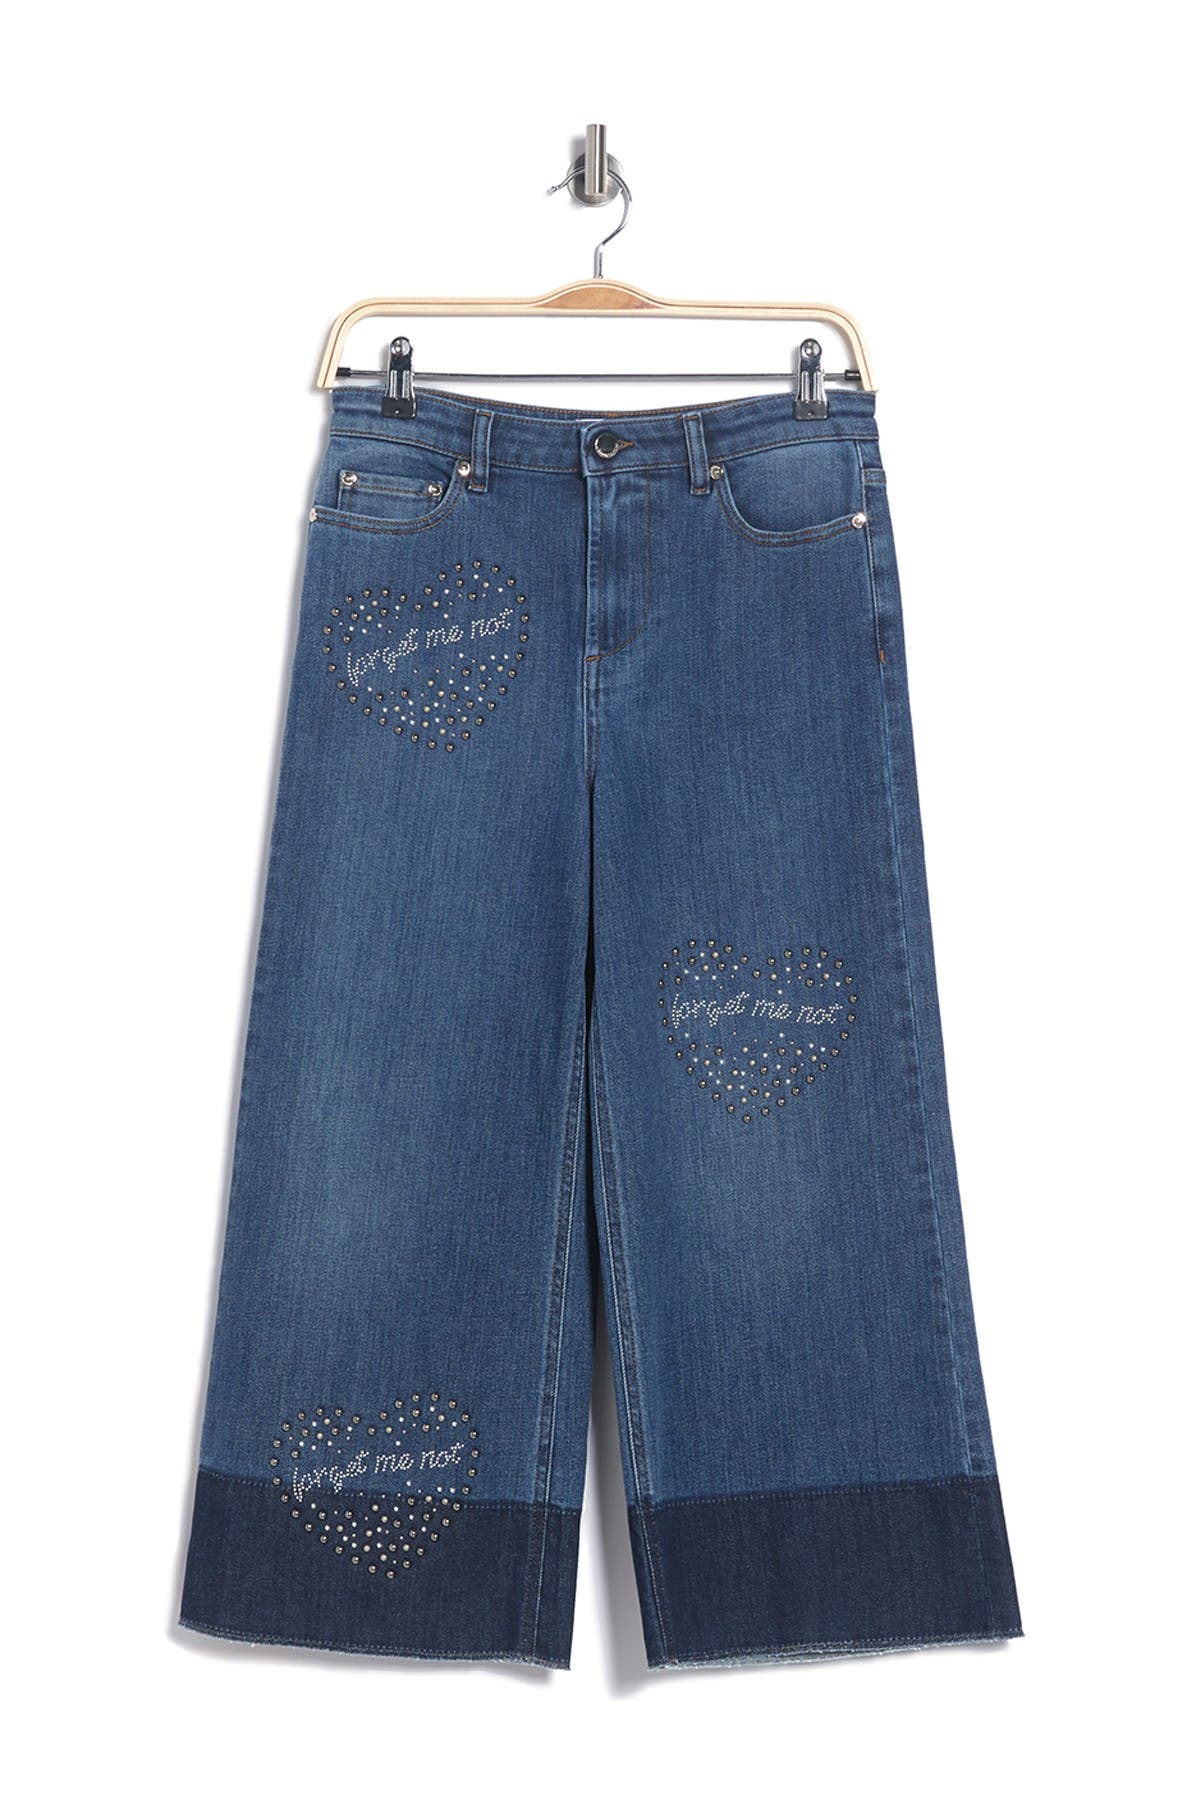 Red Valentino Cropped Studded Flare Leg Jeans In Navy3